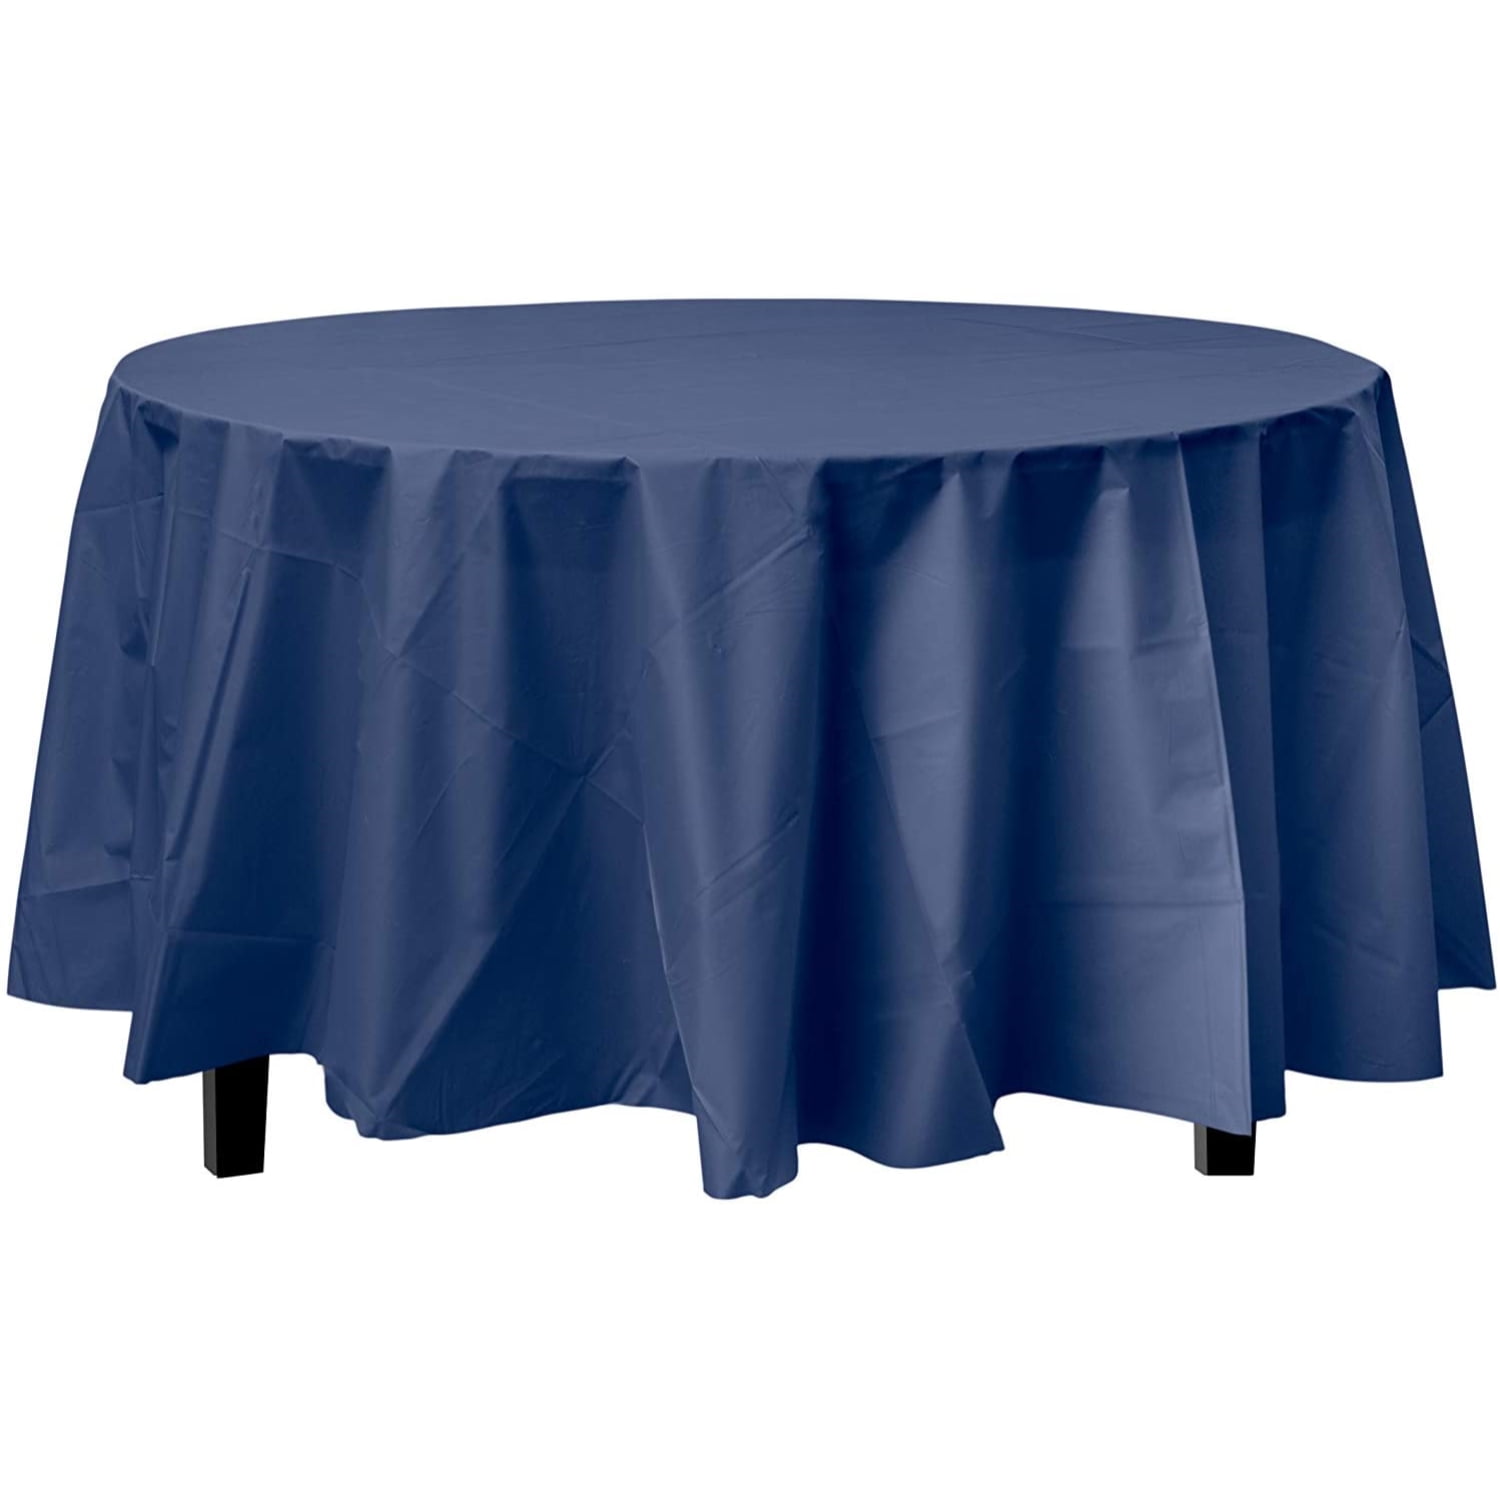 Bulk Premium Plastic Disposable 84 Inch, What Size Tablecloth For 65 Inch Round Table